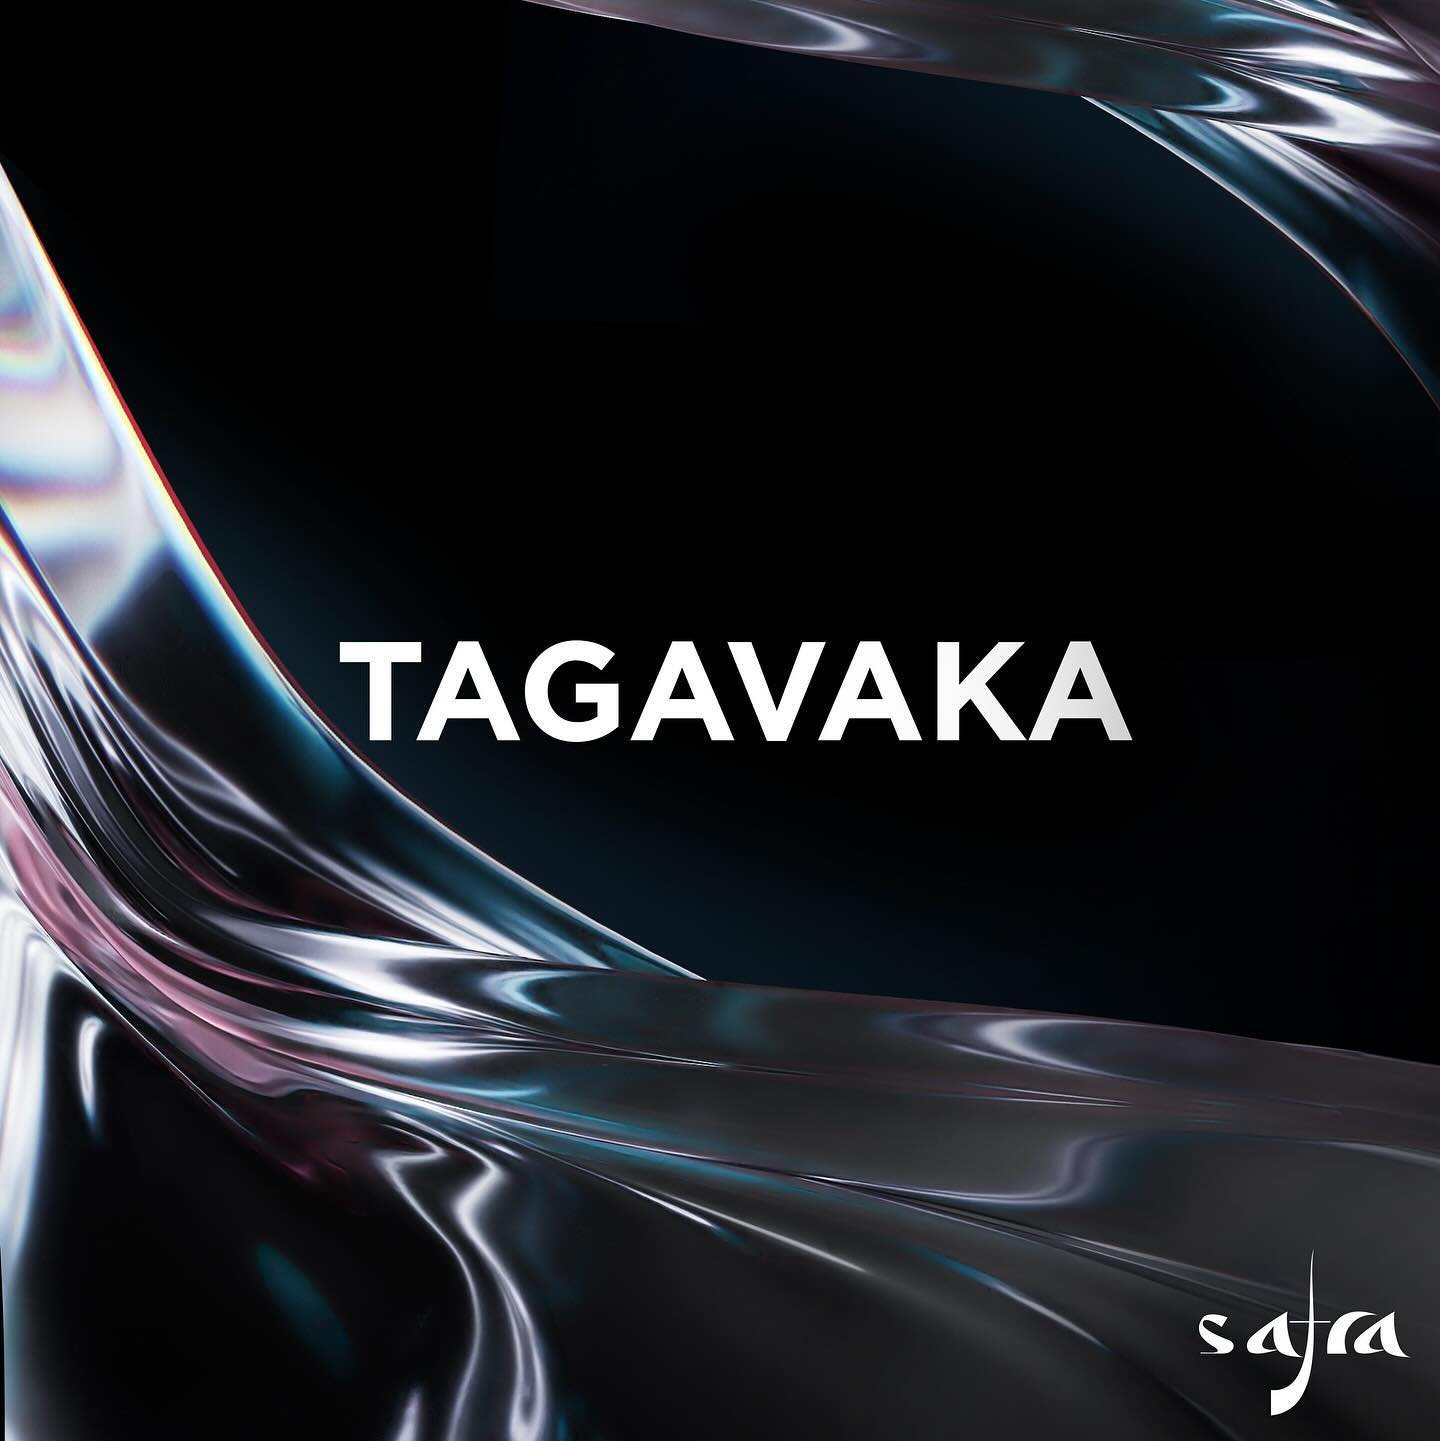 Check out the mesmerizing DJ set from @tagavakamusic, a captivating music and art project hailing from Scotland, UK. Tagavaka, meaning &ldquo;to drift away&rdquo; in search of love, adventure, or closure, embodies the spirit of seeking. Ivan Hall Bar